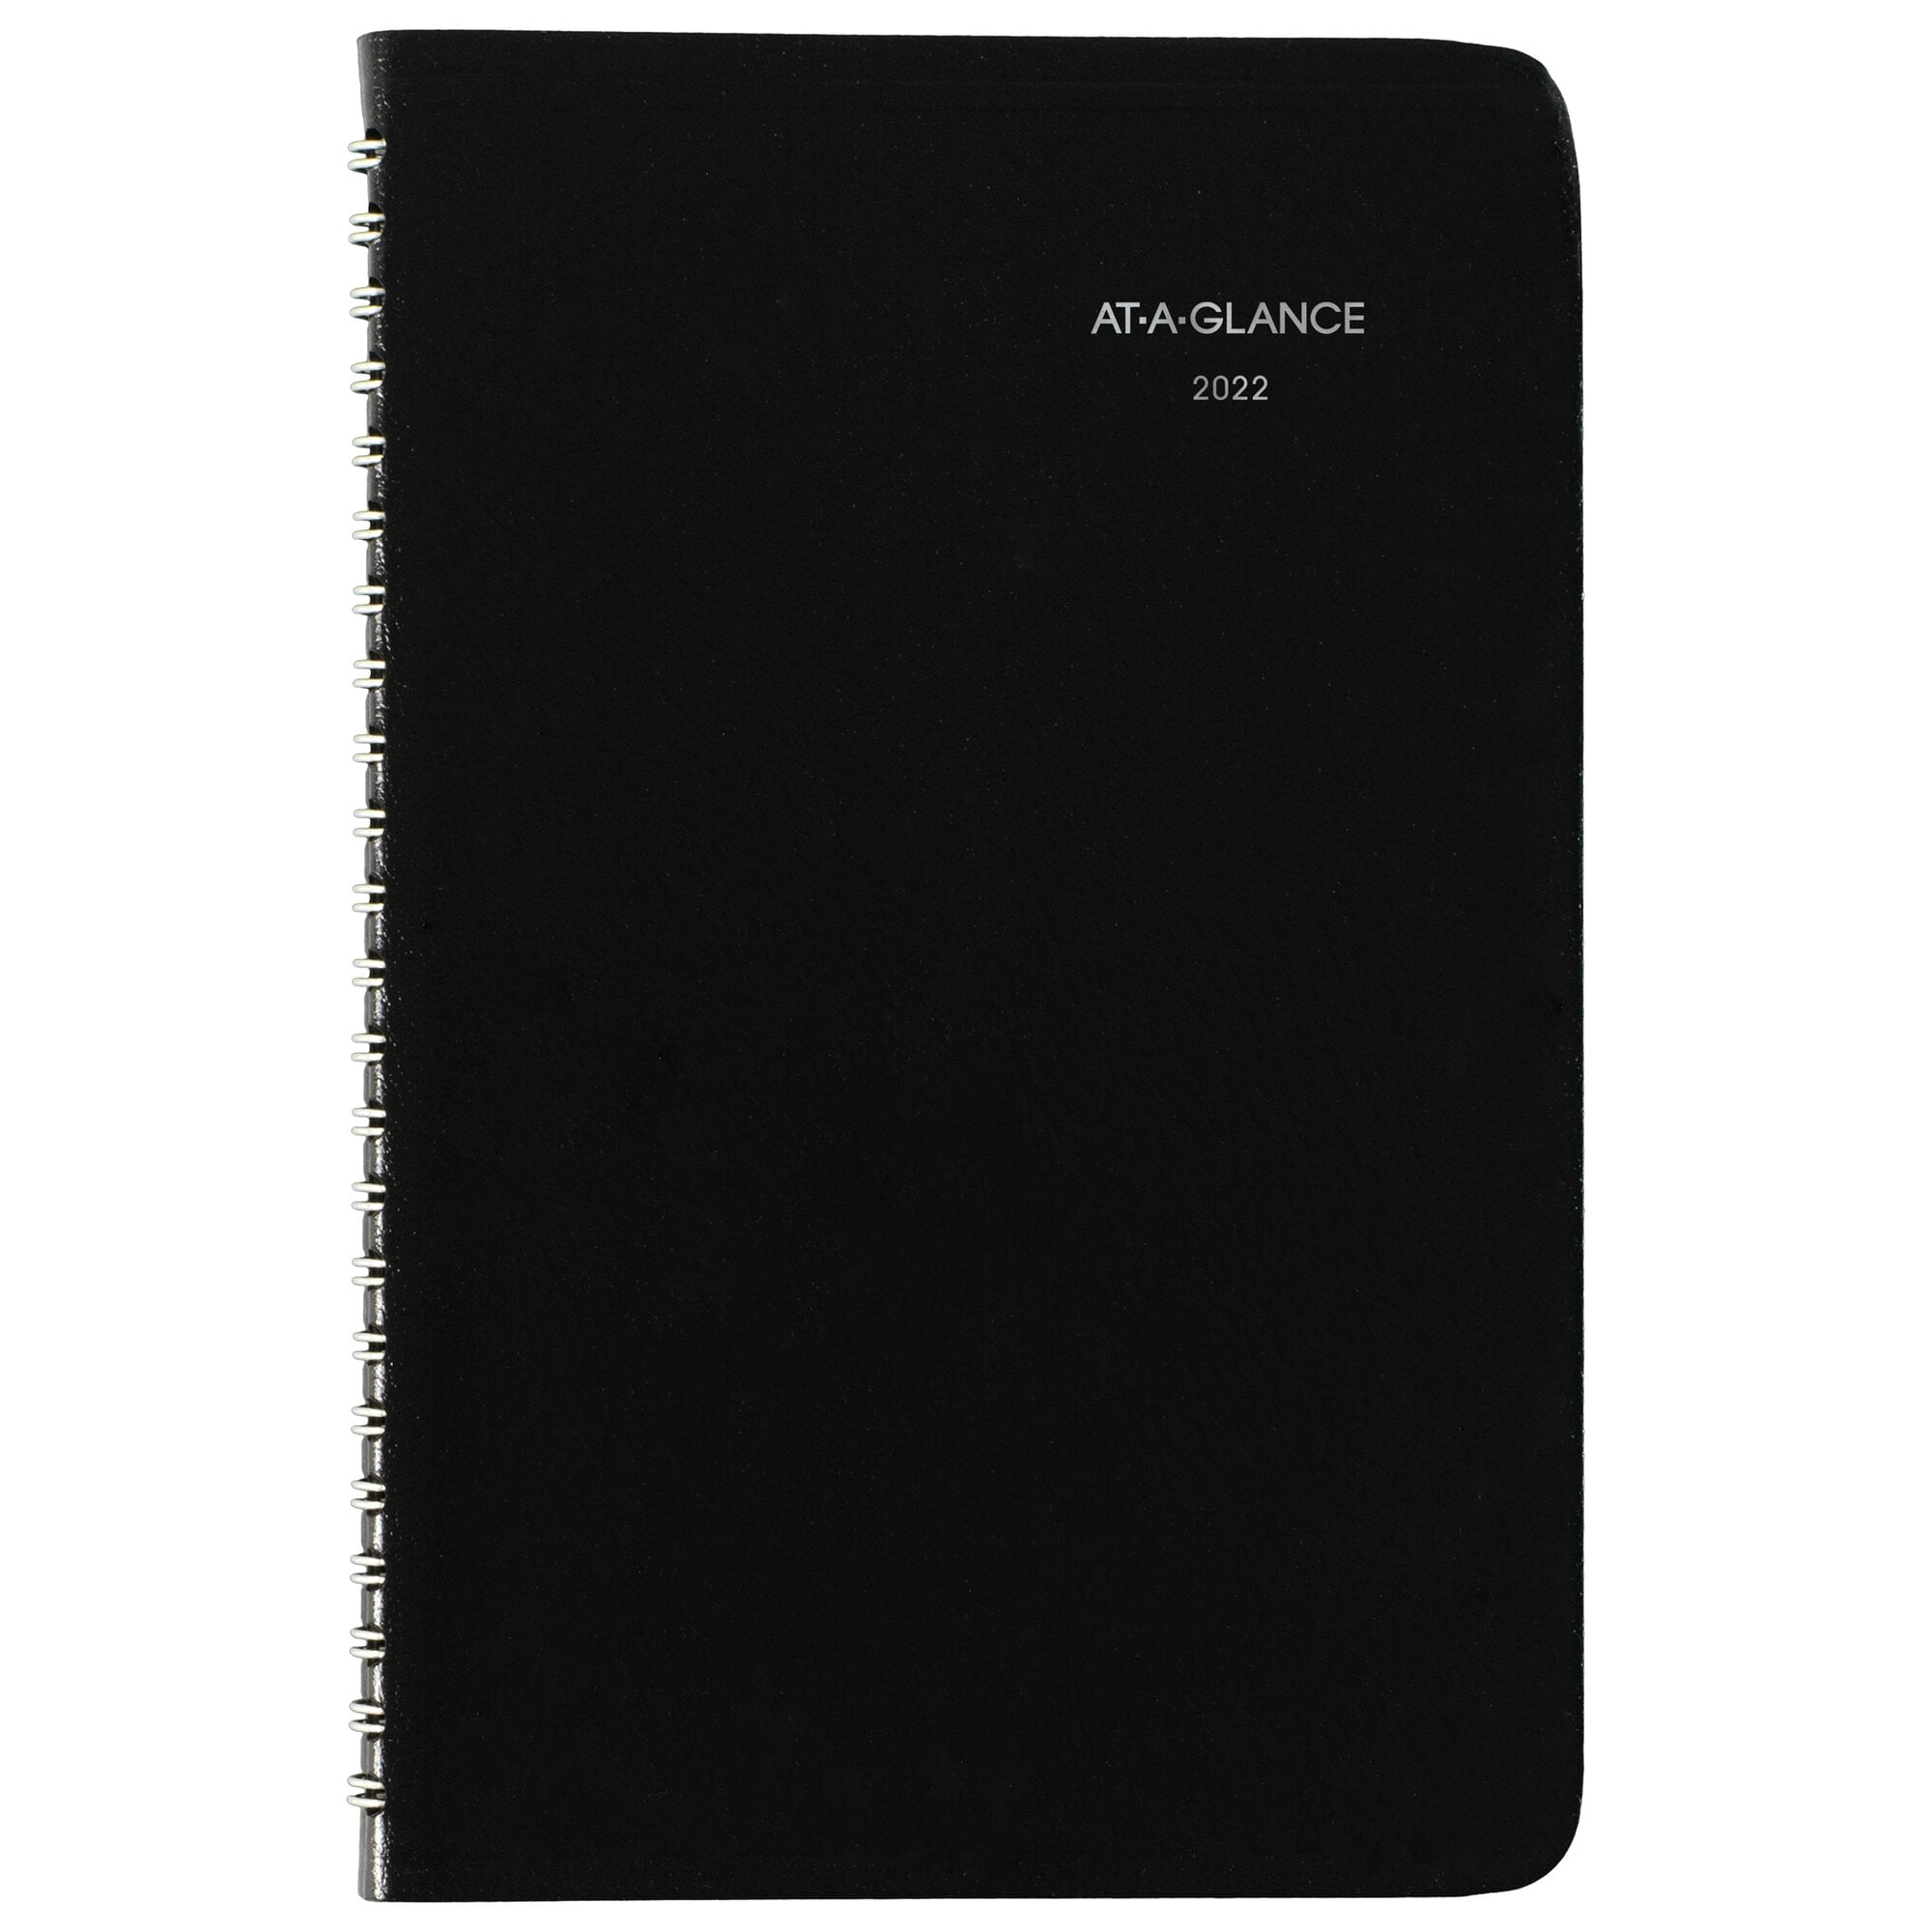 2021 2-3/4" x 4-1/4" AT-A-GLANCE Fine Weekly/Monthly Diary Black 72010521 